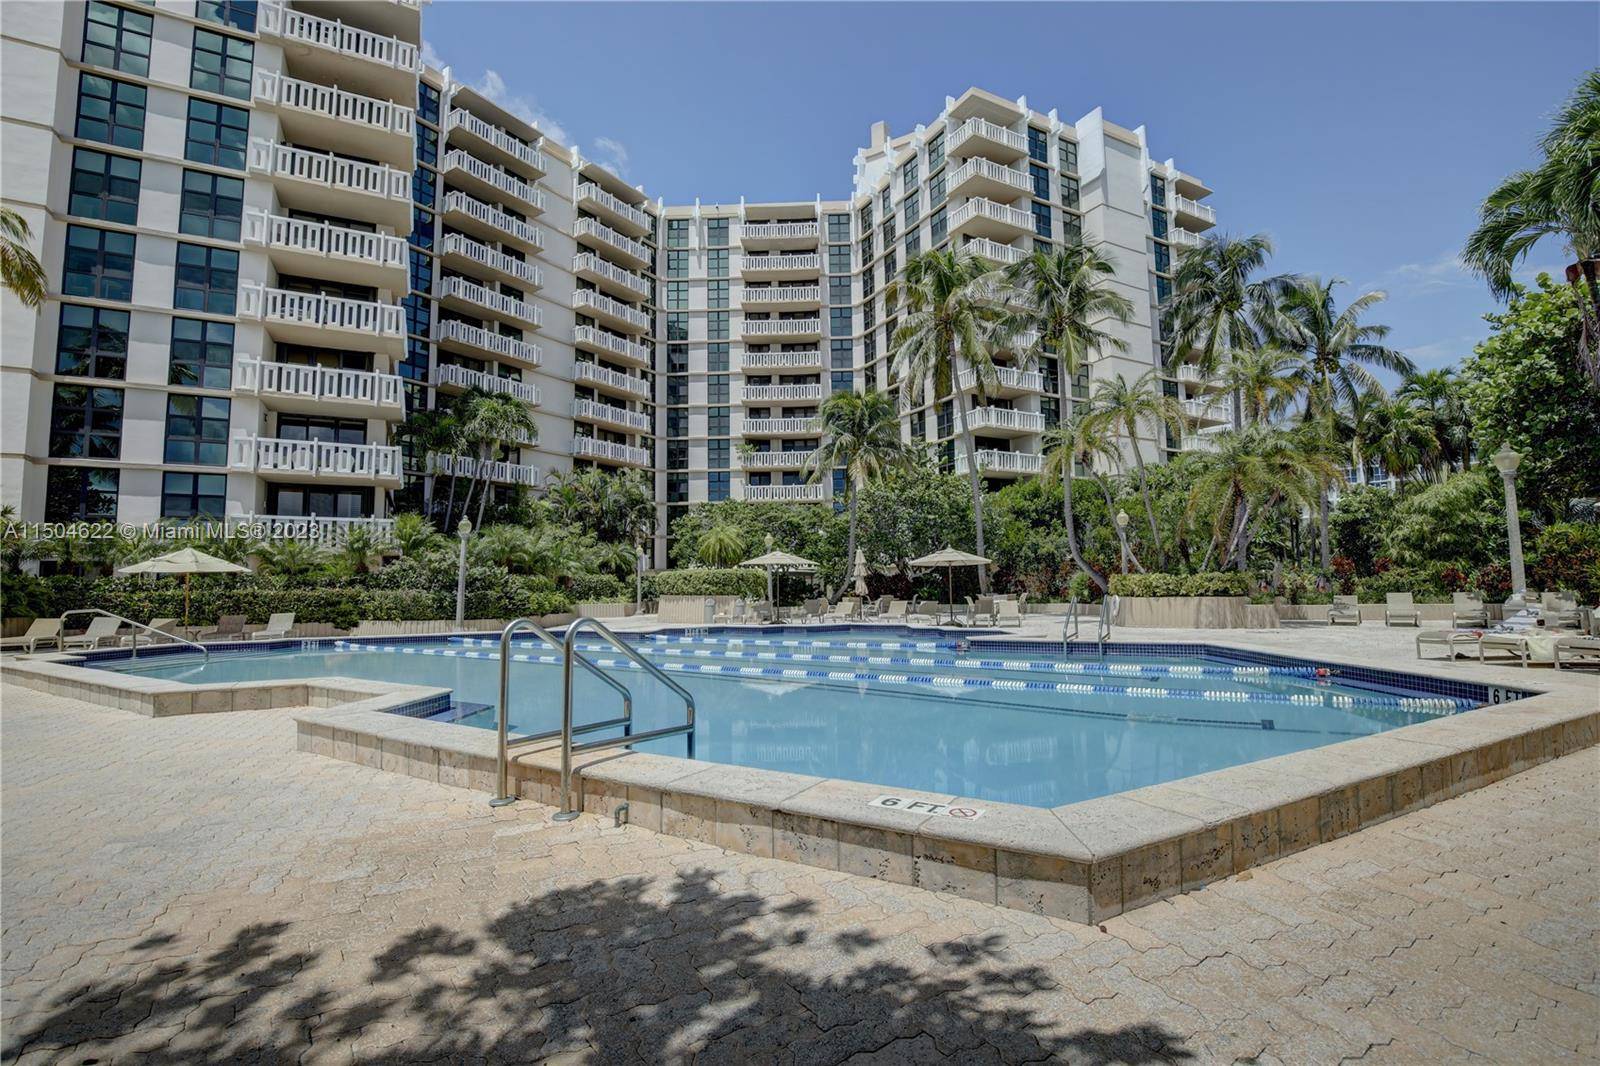 Beautiful and modern 2 bedroom and 2 bathroom apartment complete remodeled at The Towers of Key Biscayne.